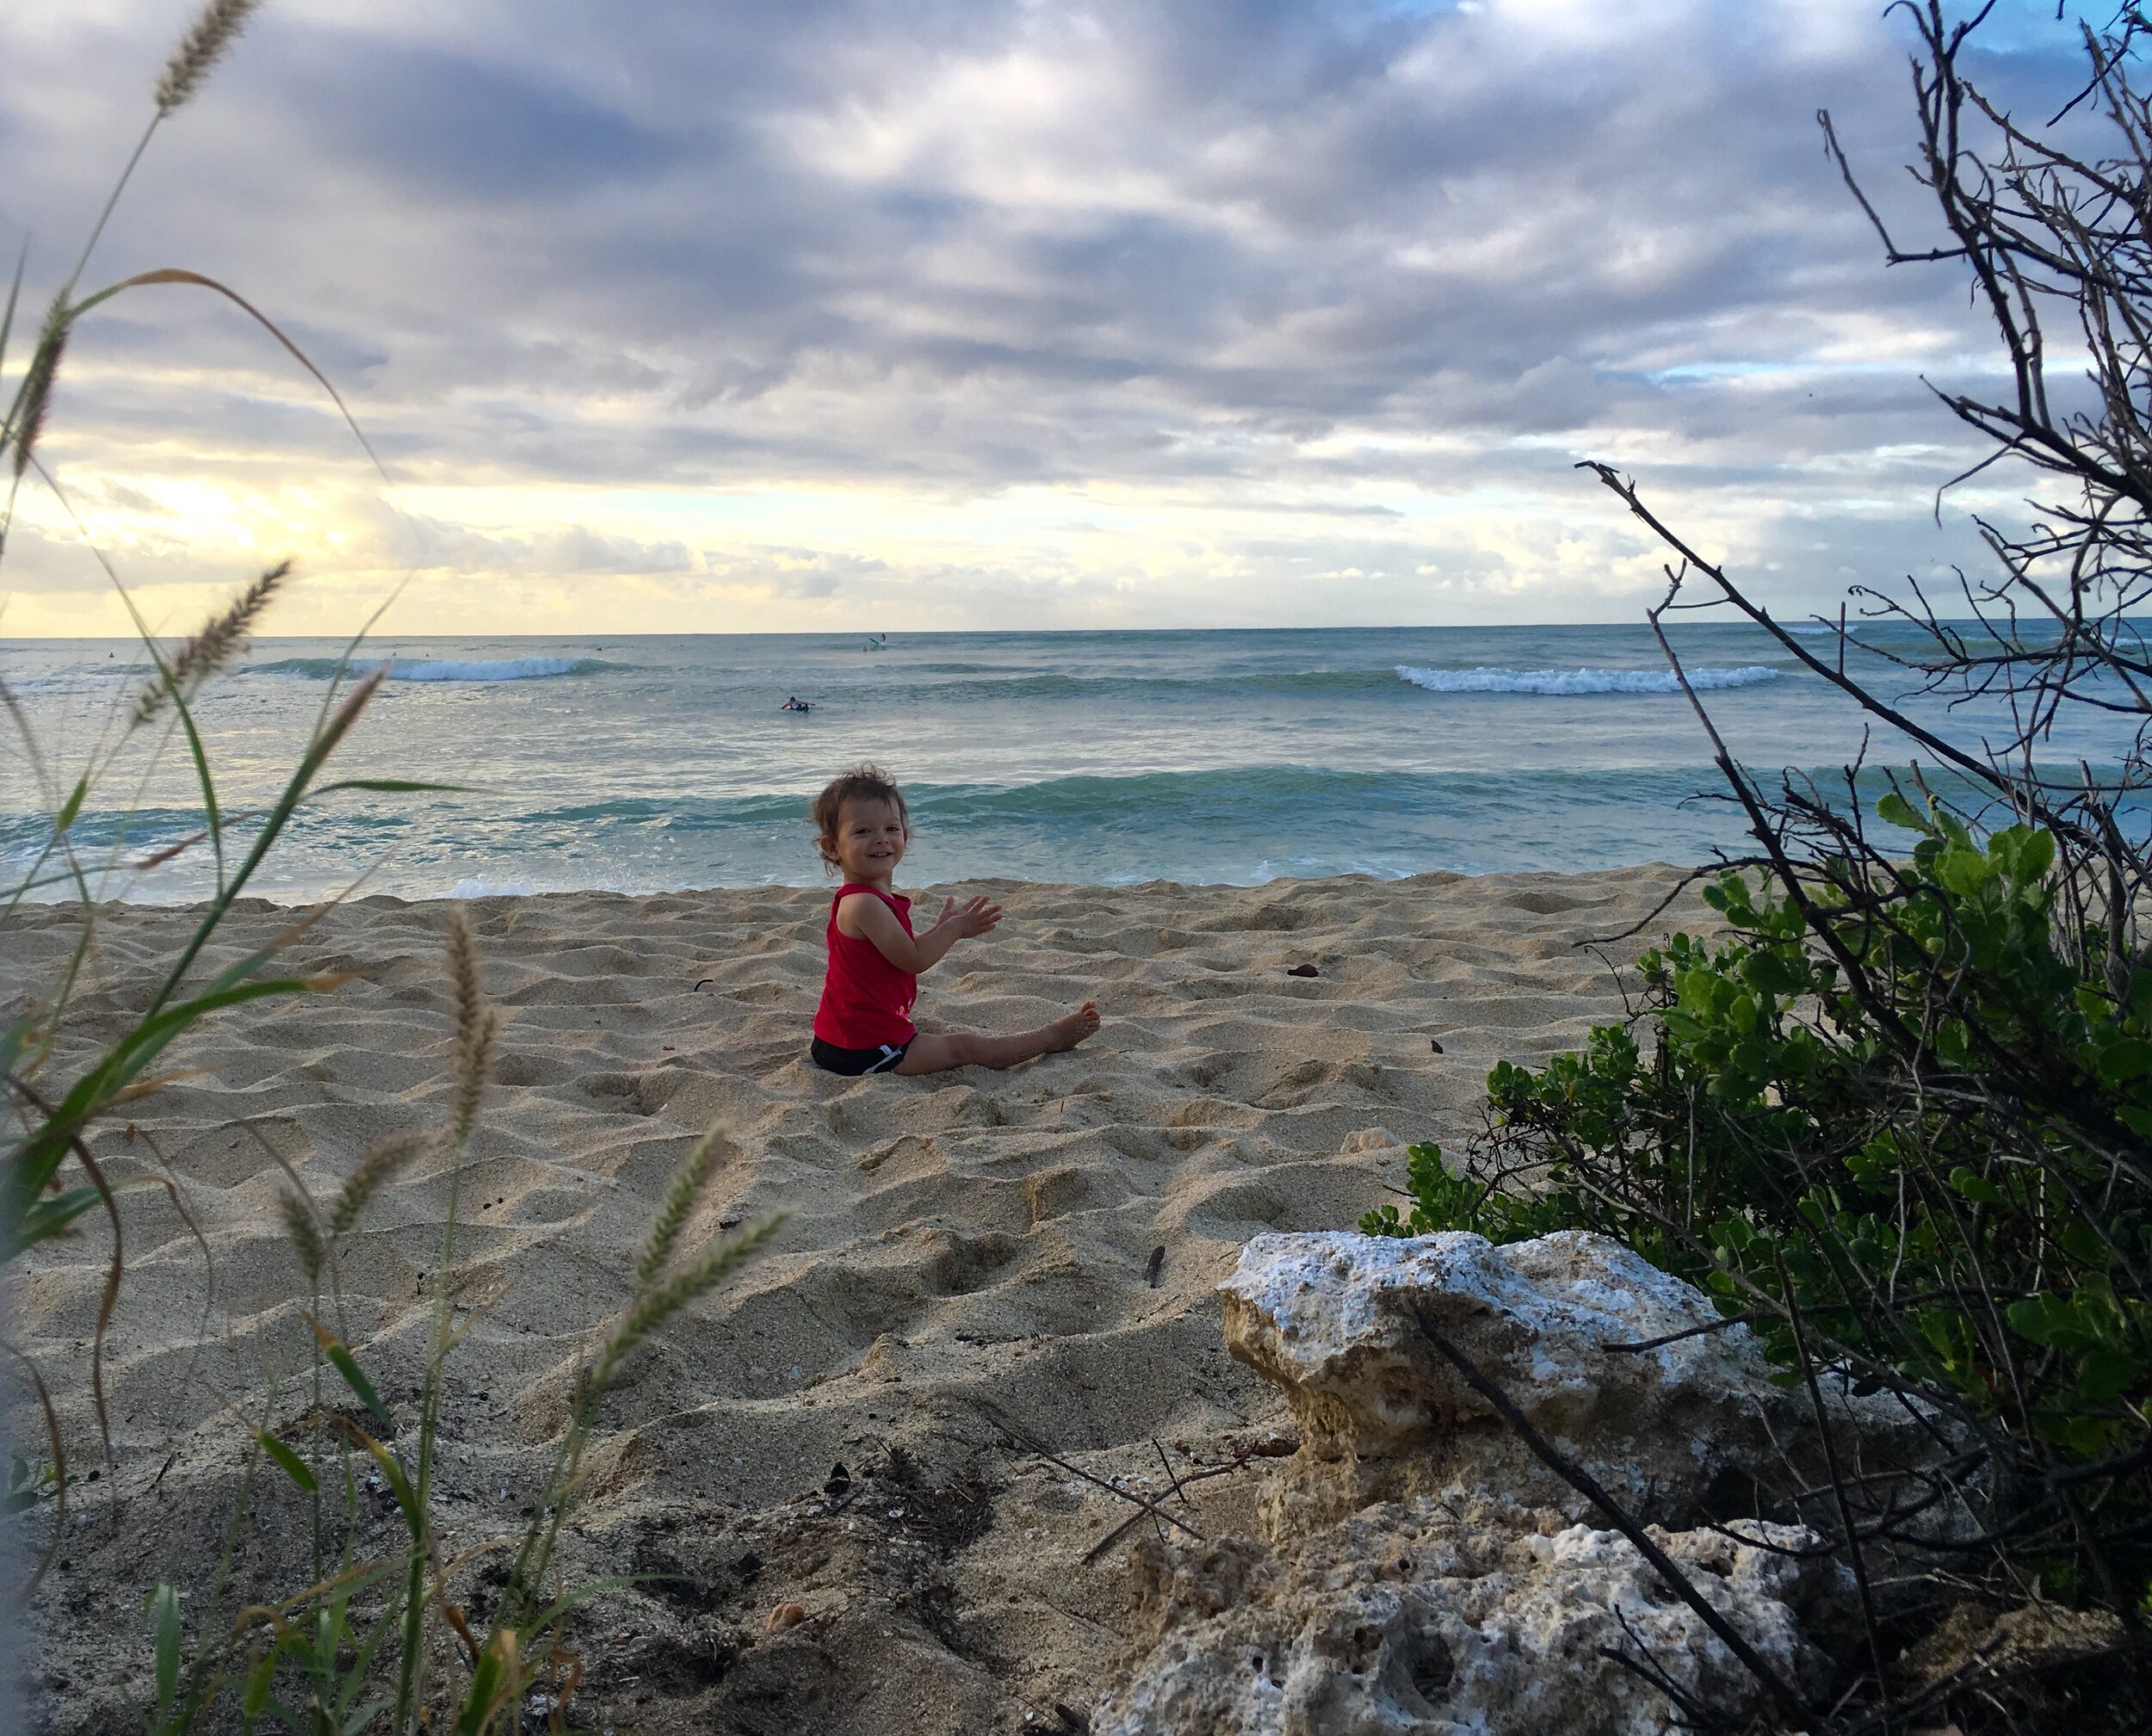 How to enjoy your Hawaii vacation with a toddler, an introduction. Visit shortsweetmom.com for travel tips.